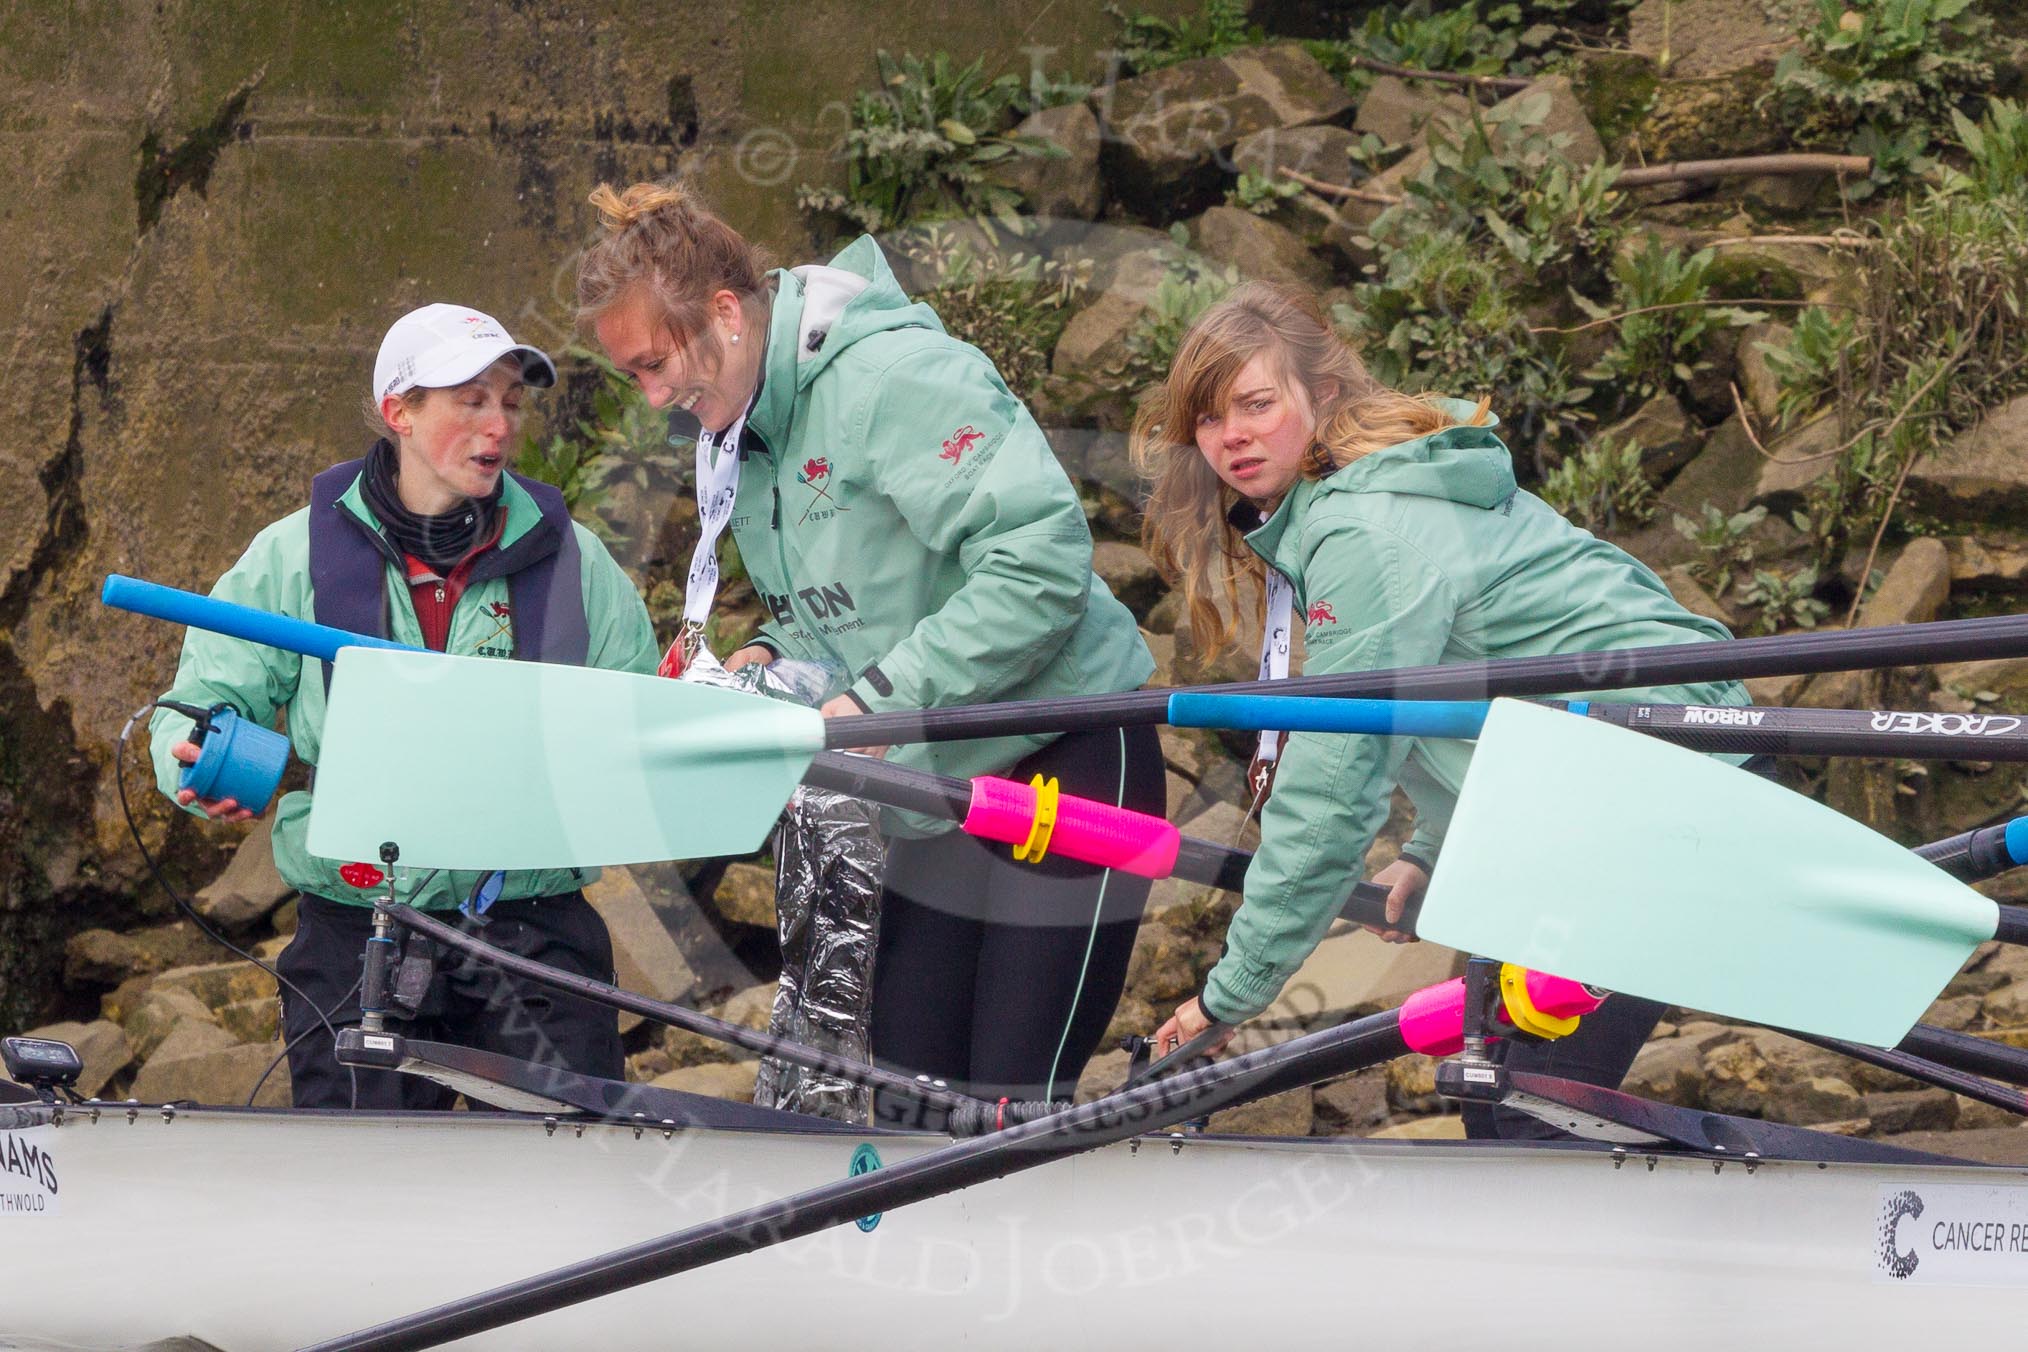 The Boat Race season 2016 -  The Cancer Research Women's Boat Race.
River Thames between Putney Bridge and Mortlake,
London SW15,

United Kingdom,
on 27 March 2016 at 14:40, image #320